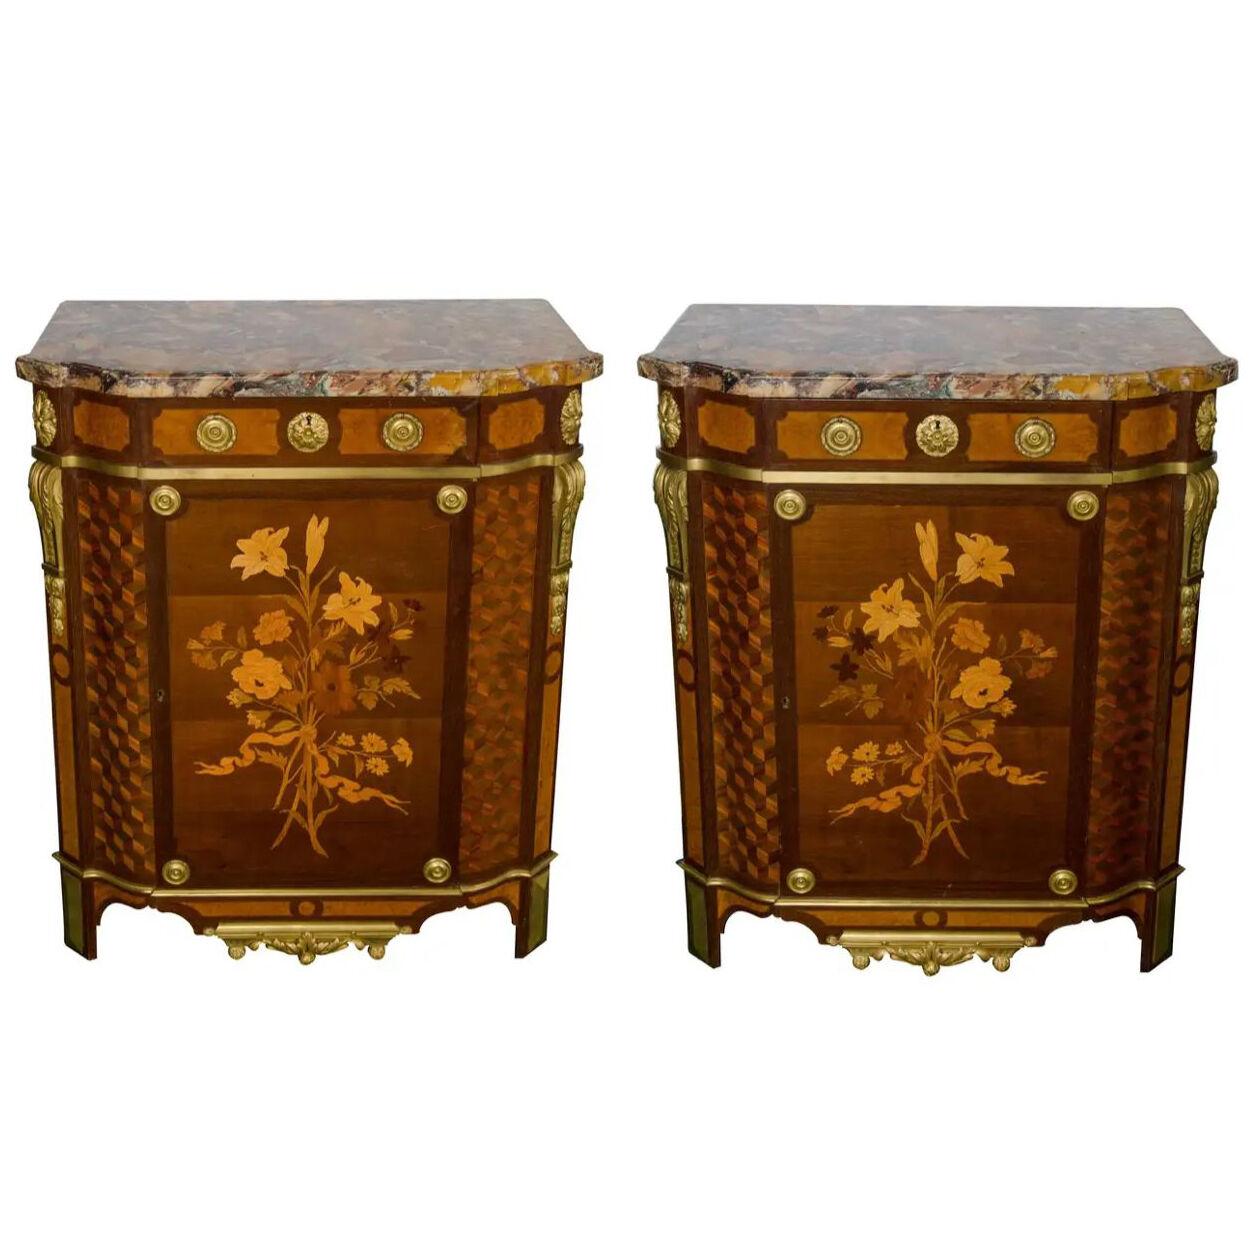 Pair of Side Cabinets by 'Francoise Linke'